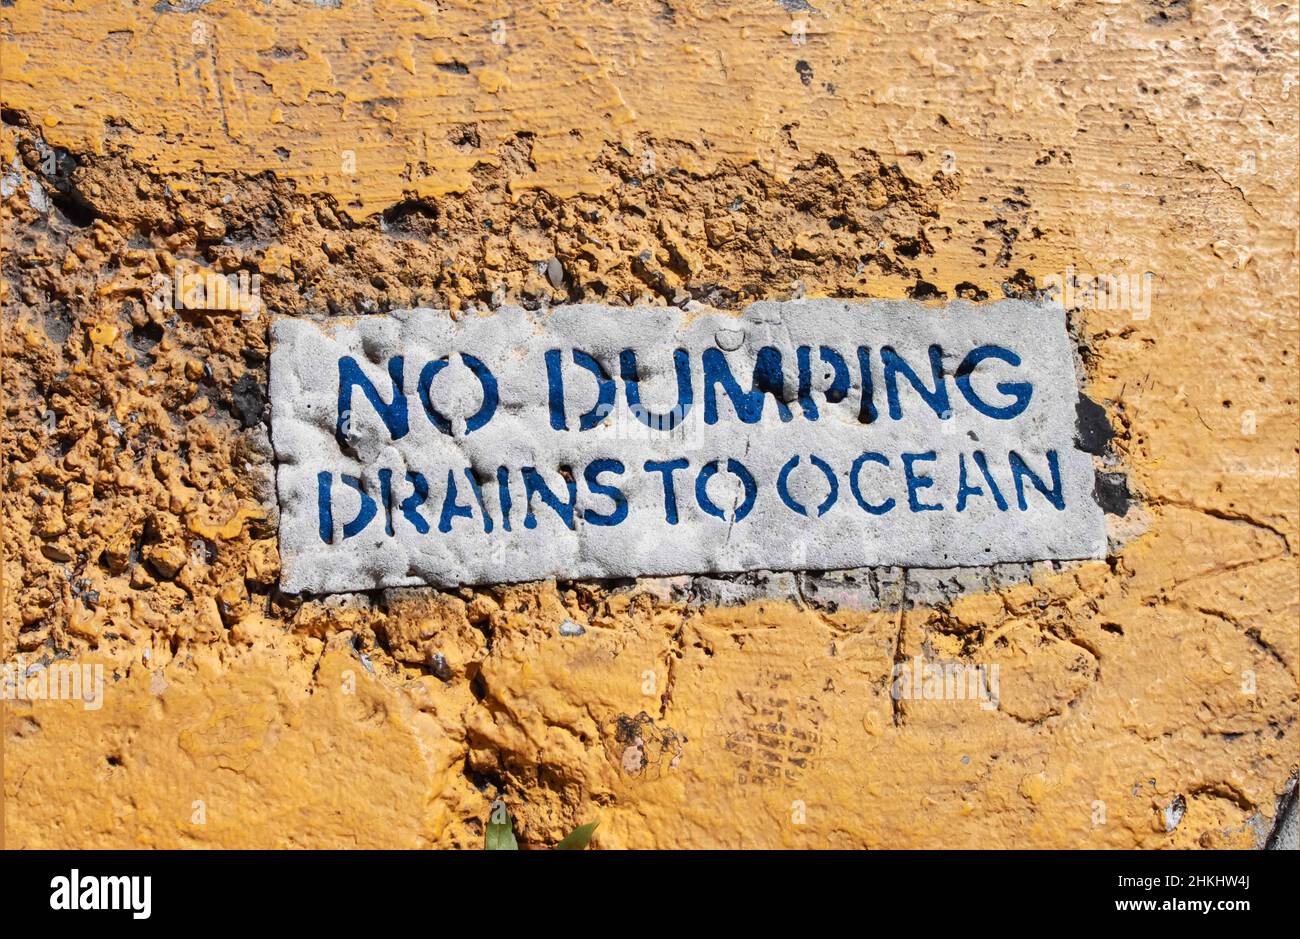 No Dumping - Drains to Ocean sign on rough grungy yellow painted sidewalk Stock Photo